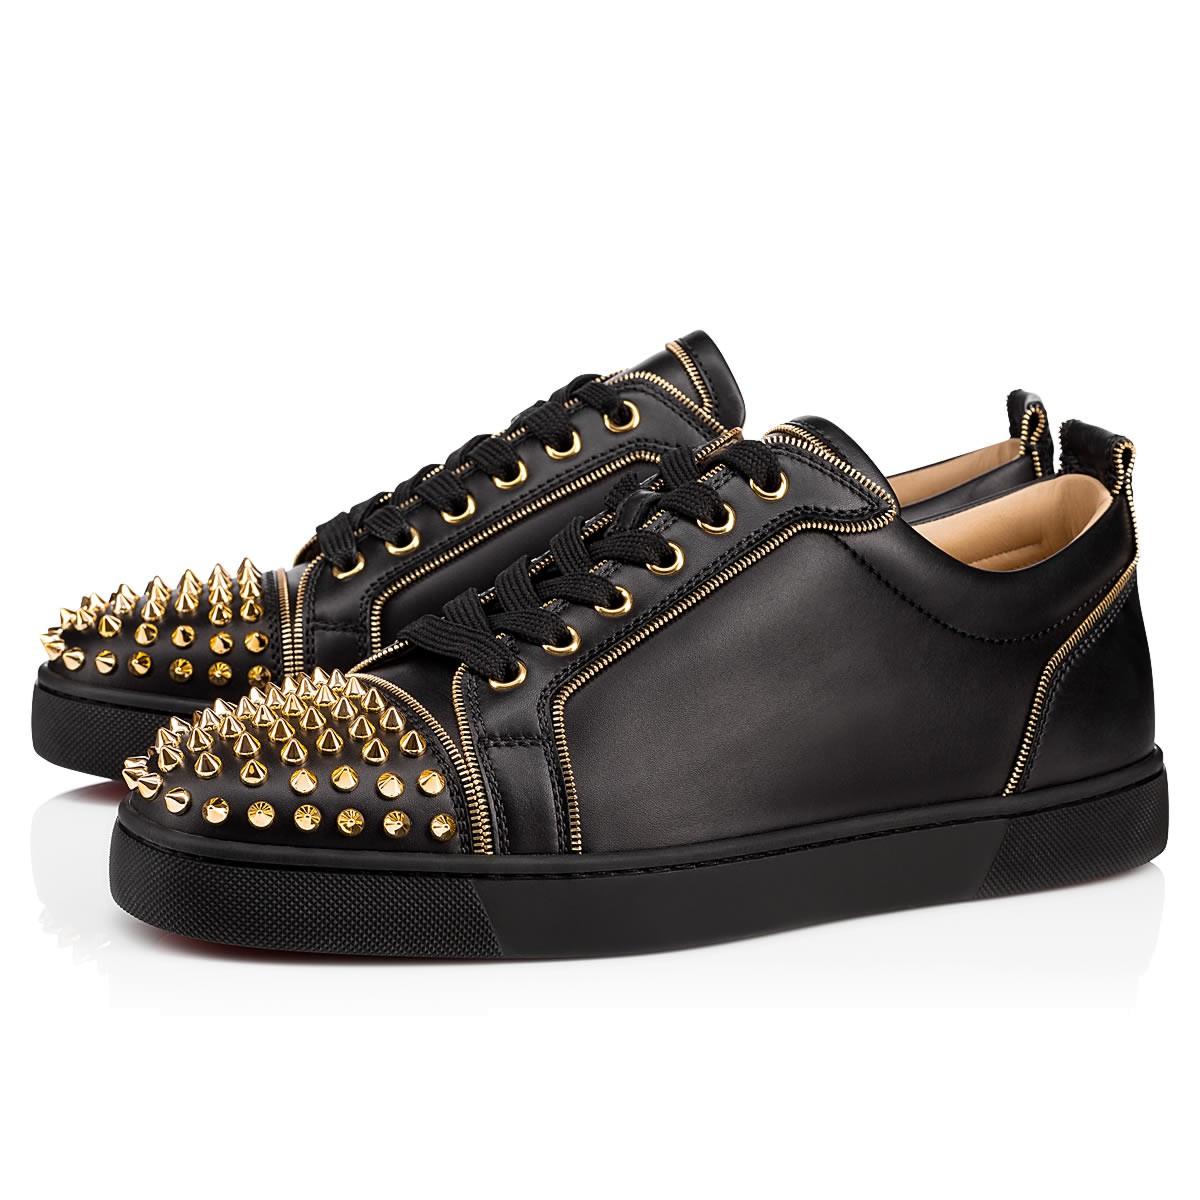 louboutin black and gold